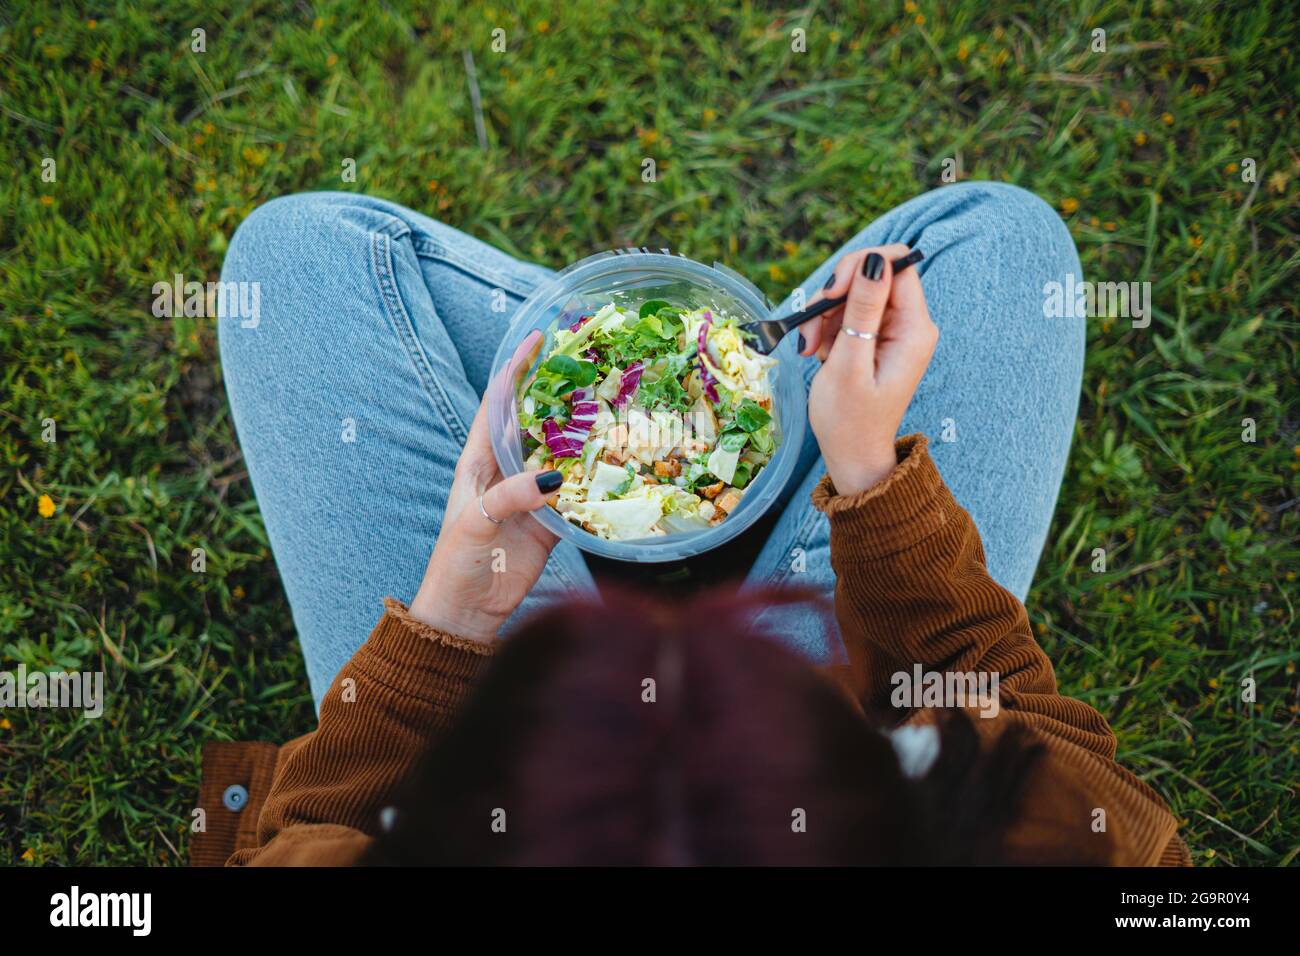 Teenager girl eating a salad while sitting on grass. She is enjoying the calm. Shot from above. Stock Photo